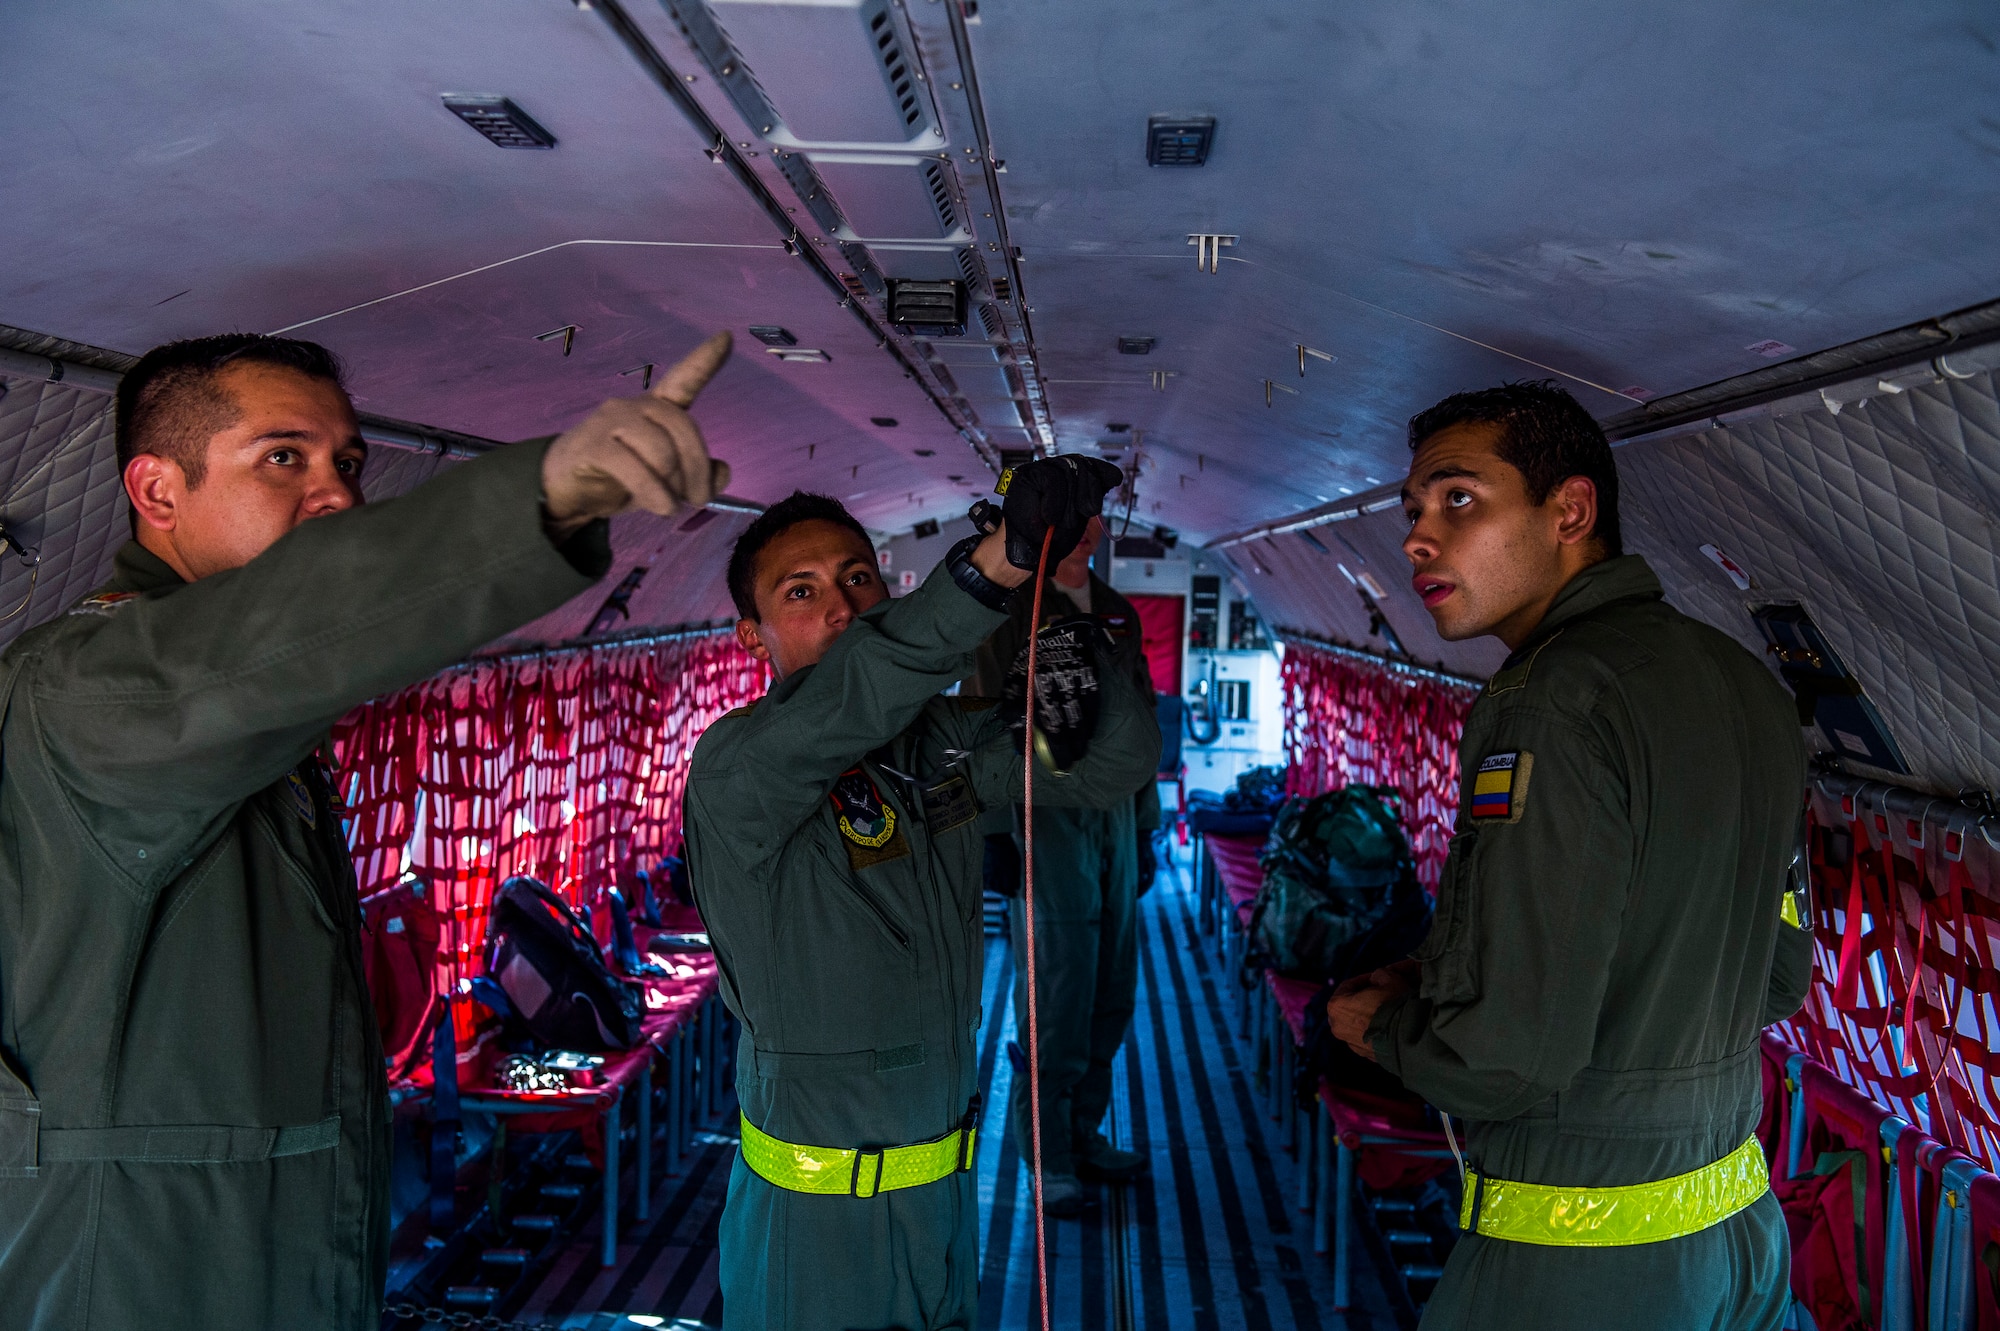 Tech. Sgt. Javier Borgesmartin, a loadmaster instructor for the 571st Mobility Support Advisory Squadron, shows Colombian Air Force loadmasters Tecnico Cuatro Javier Castillo and Sergio Leonardo Molina correct procedures for rigging a winch retriever cable on a Colombian Air Force Casa 295 aircraft in preparation for the first air drop with United States Air Force personnel aboard on March 3, 2015 at Marandua Air Force Base in Colombia, South America. (Photo by U.S. Air Force Tech. Sgt. Matthew Hannen)